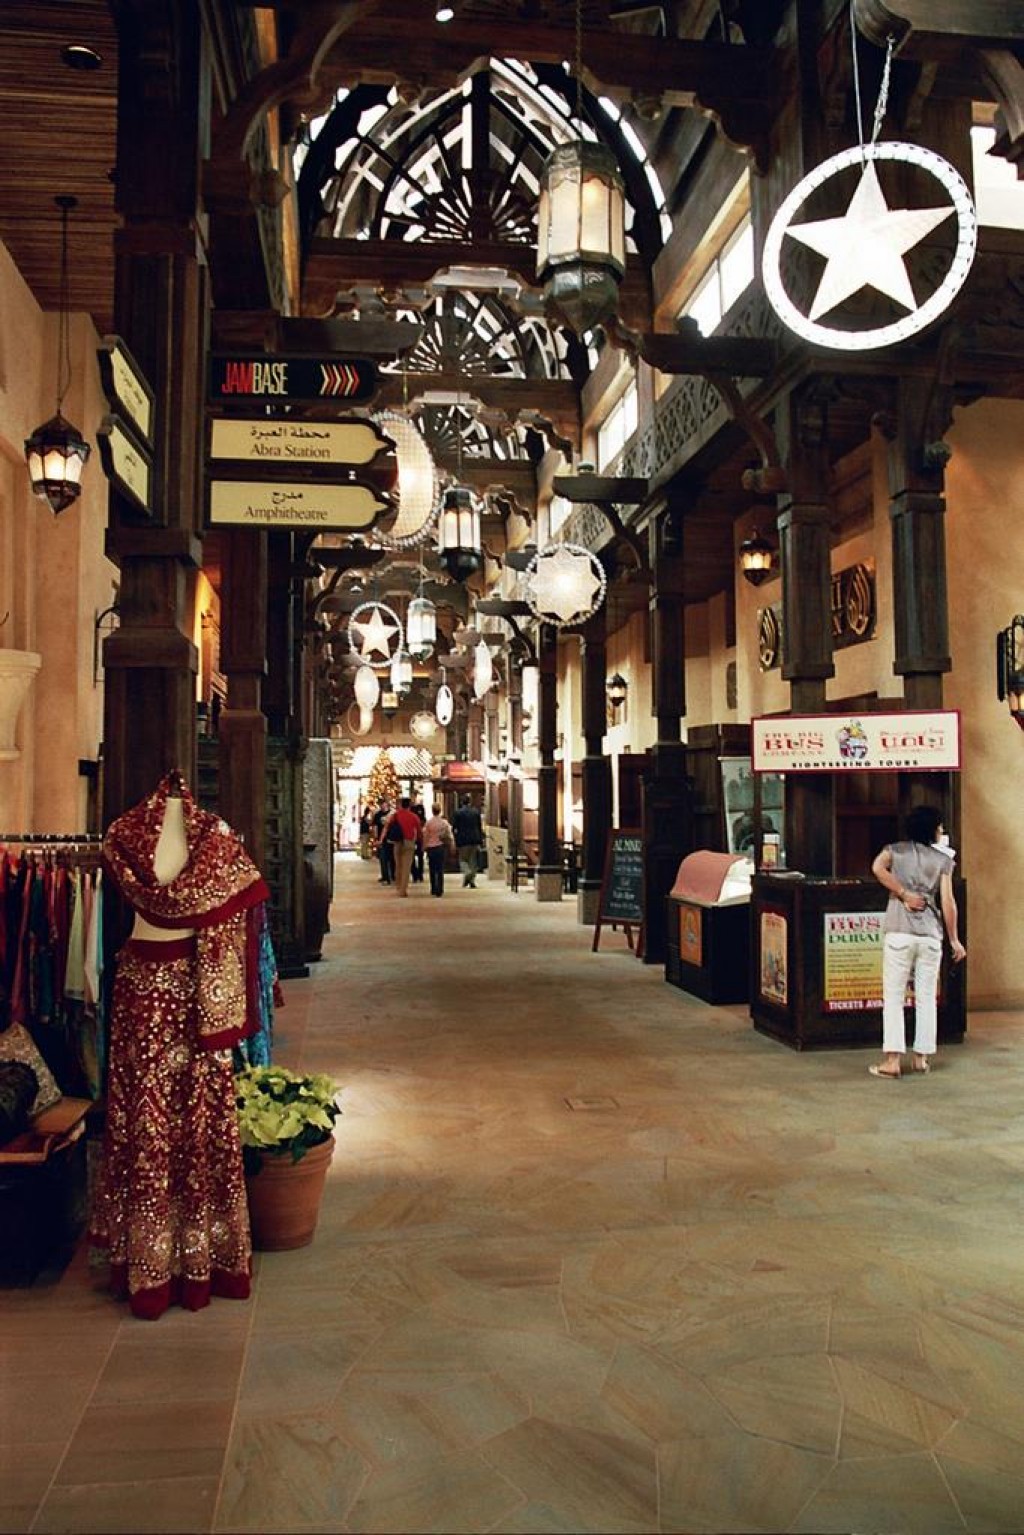 Inside the Souq Madinat Jumeirah, an upscale souq with overpriced (and marginally better quality) souvenirs and handicrafts.